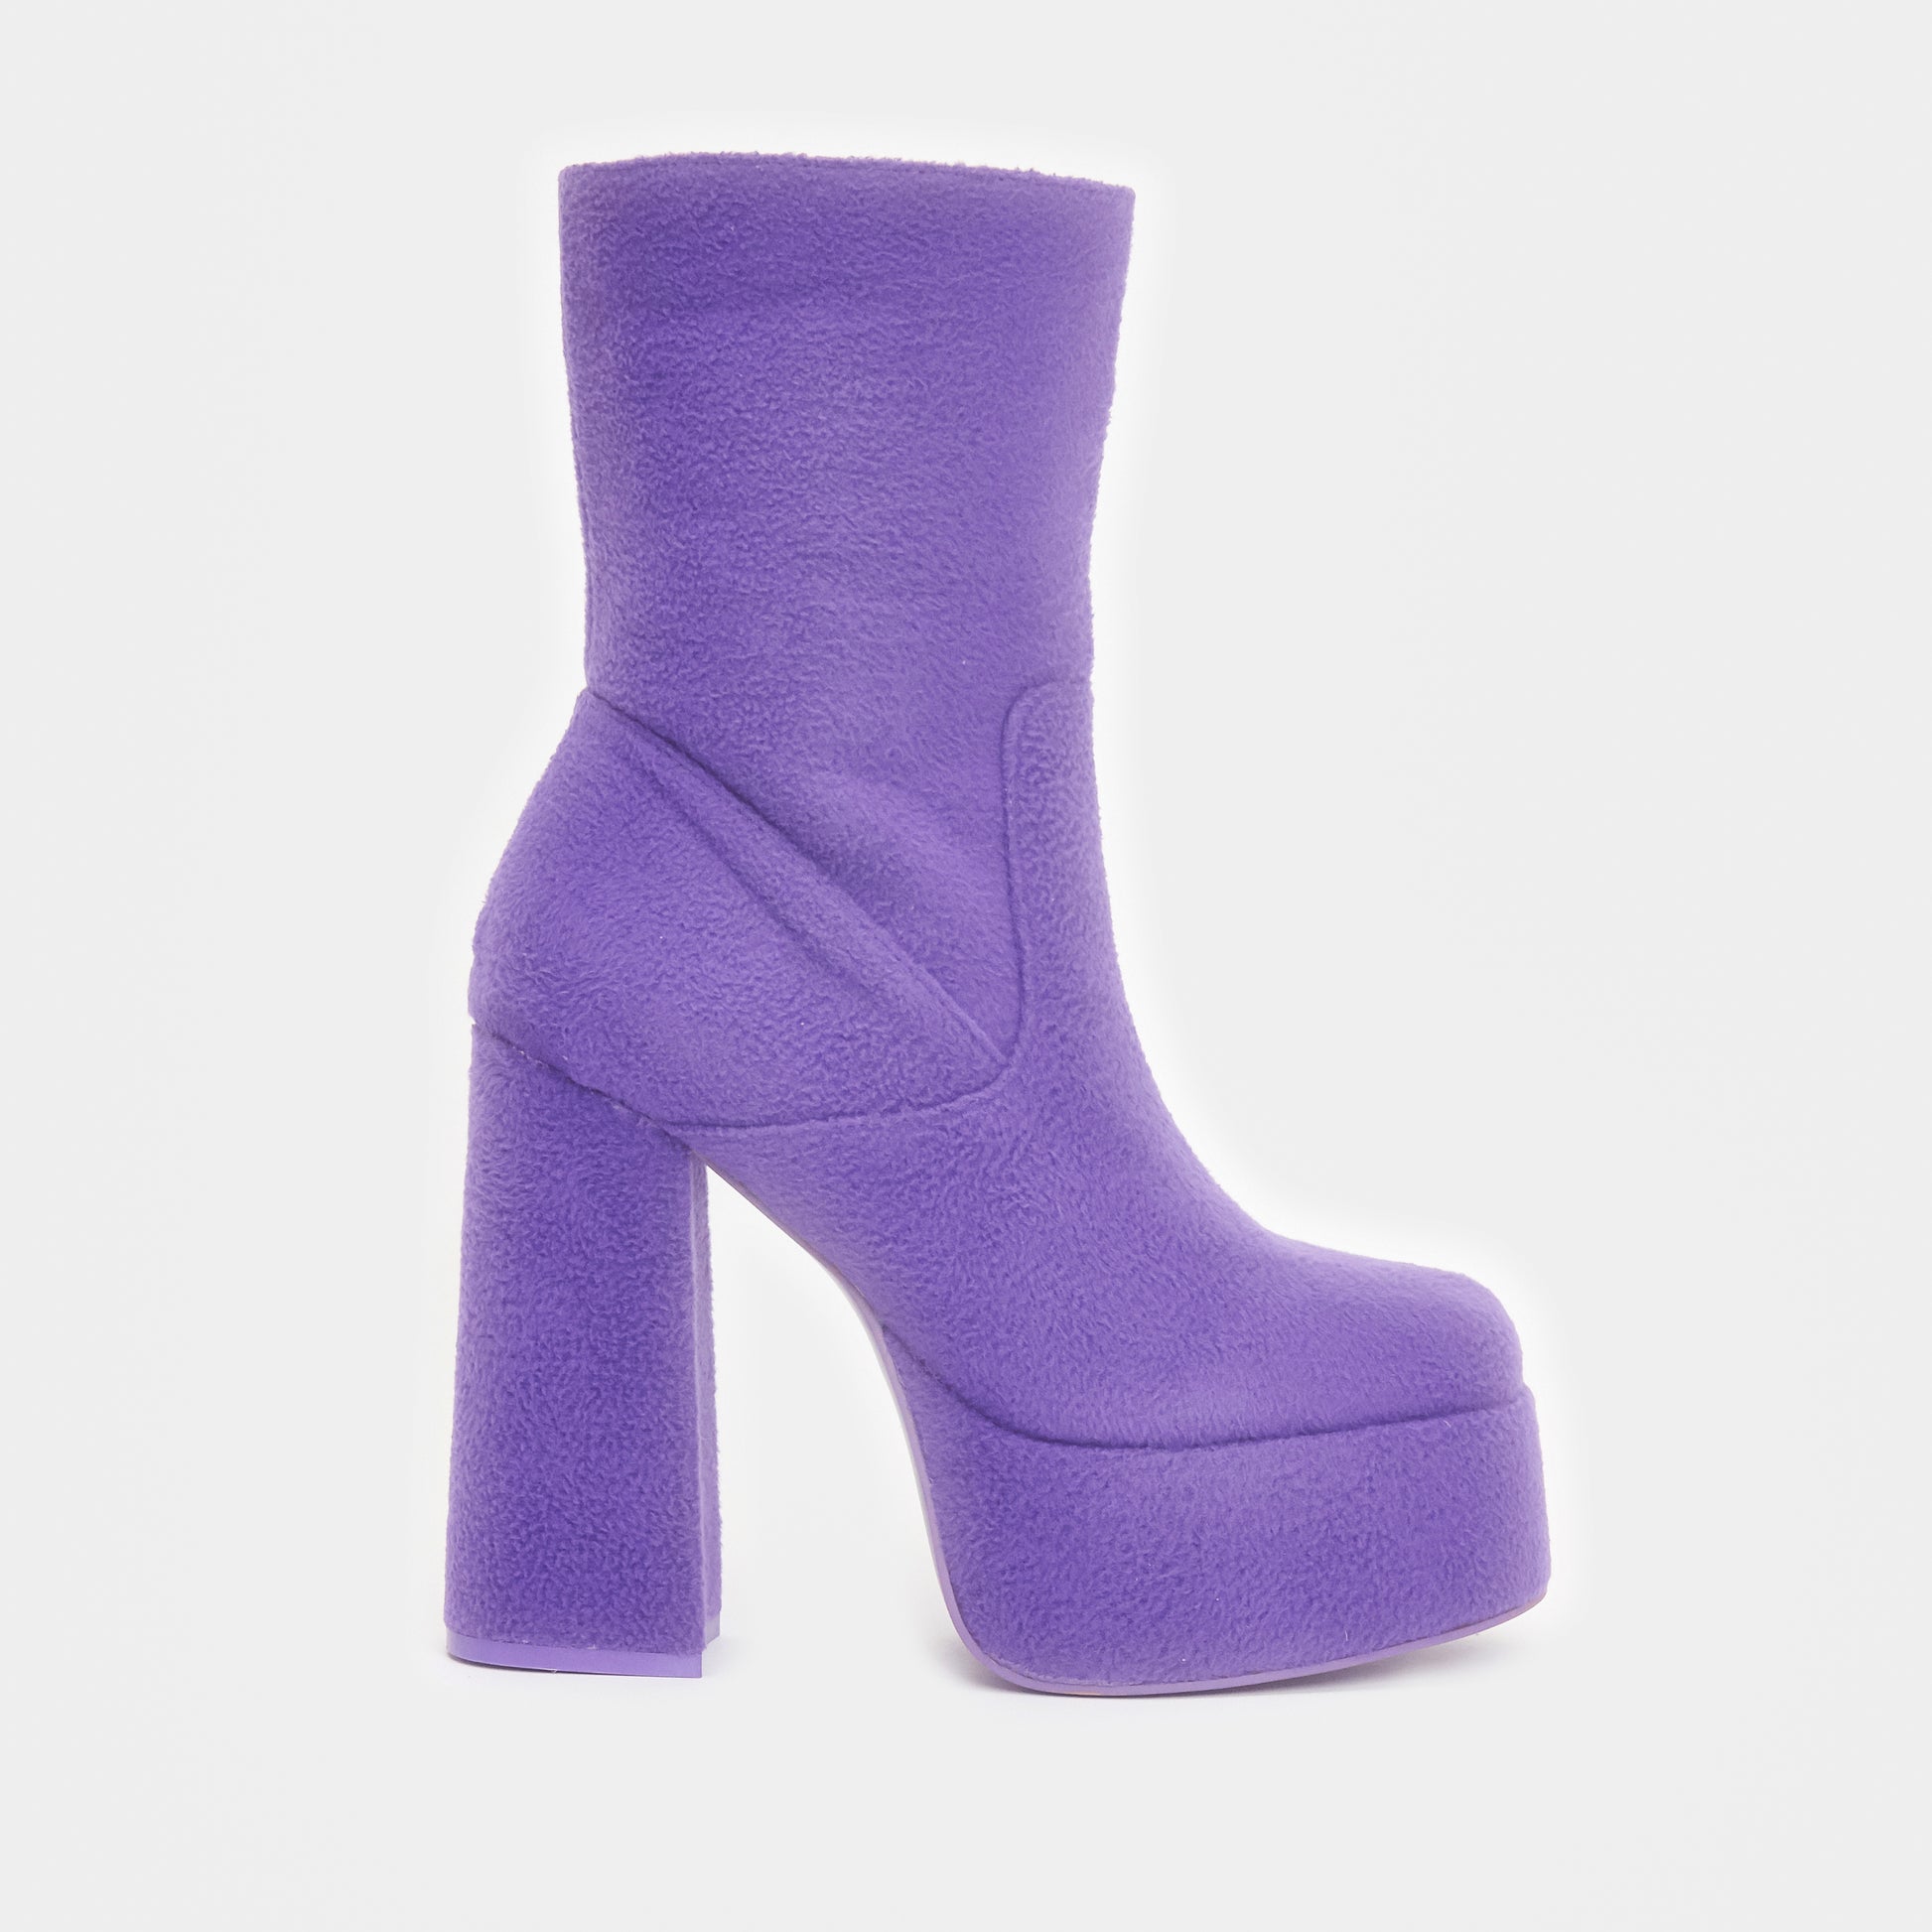 Tinky Winky Fluffy Platform Boots - Ankle Boots - KOI Footwear - Purple - Side View